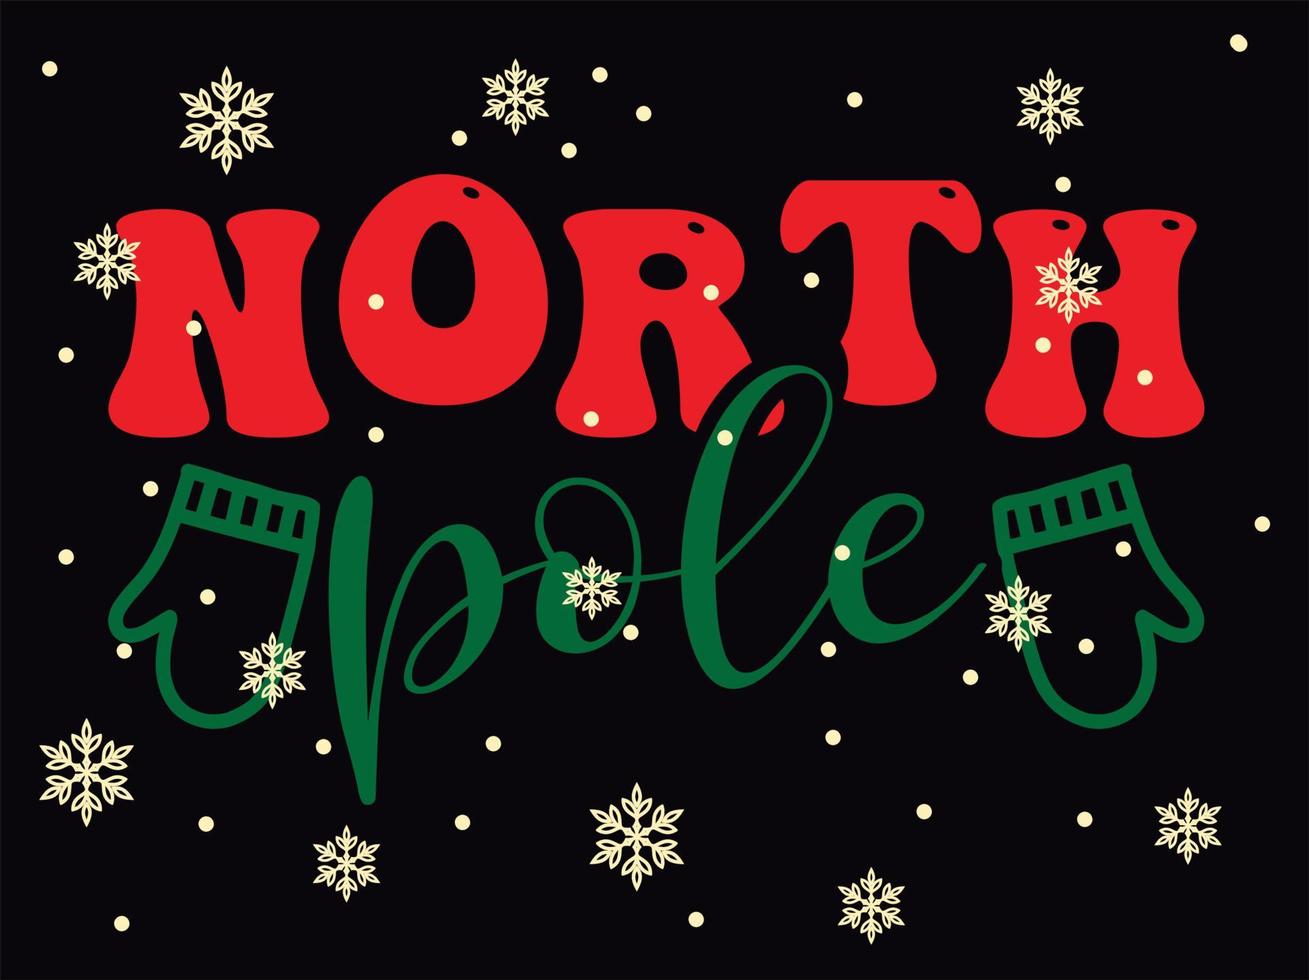 North Pole 01 Merry Christmas and Happy Holidays Typography set vector